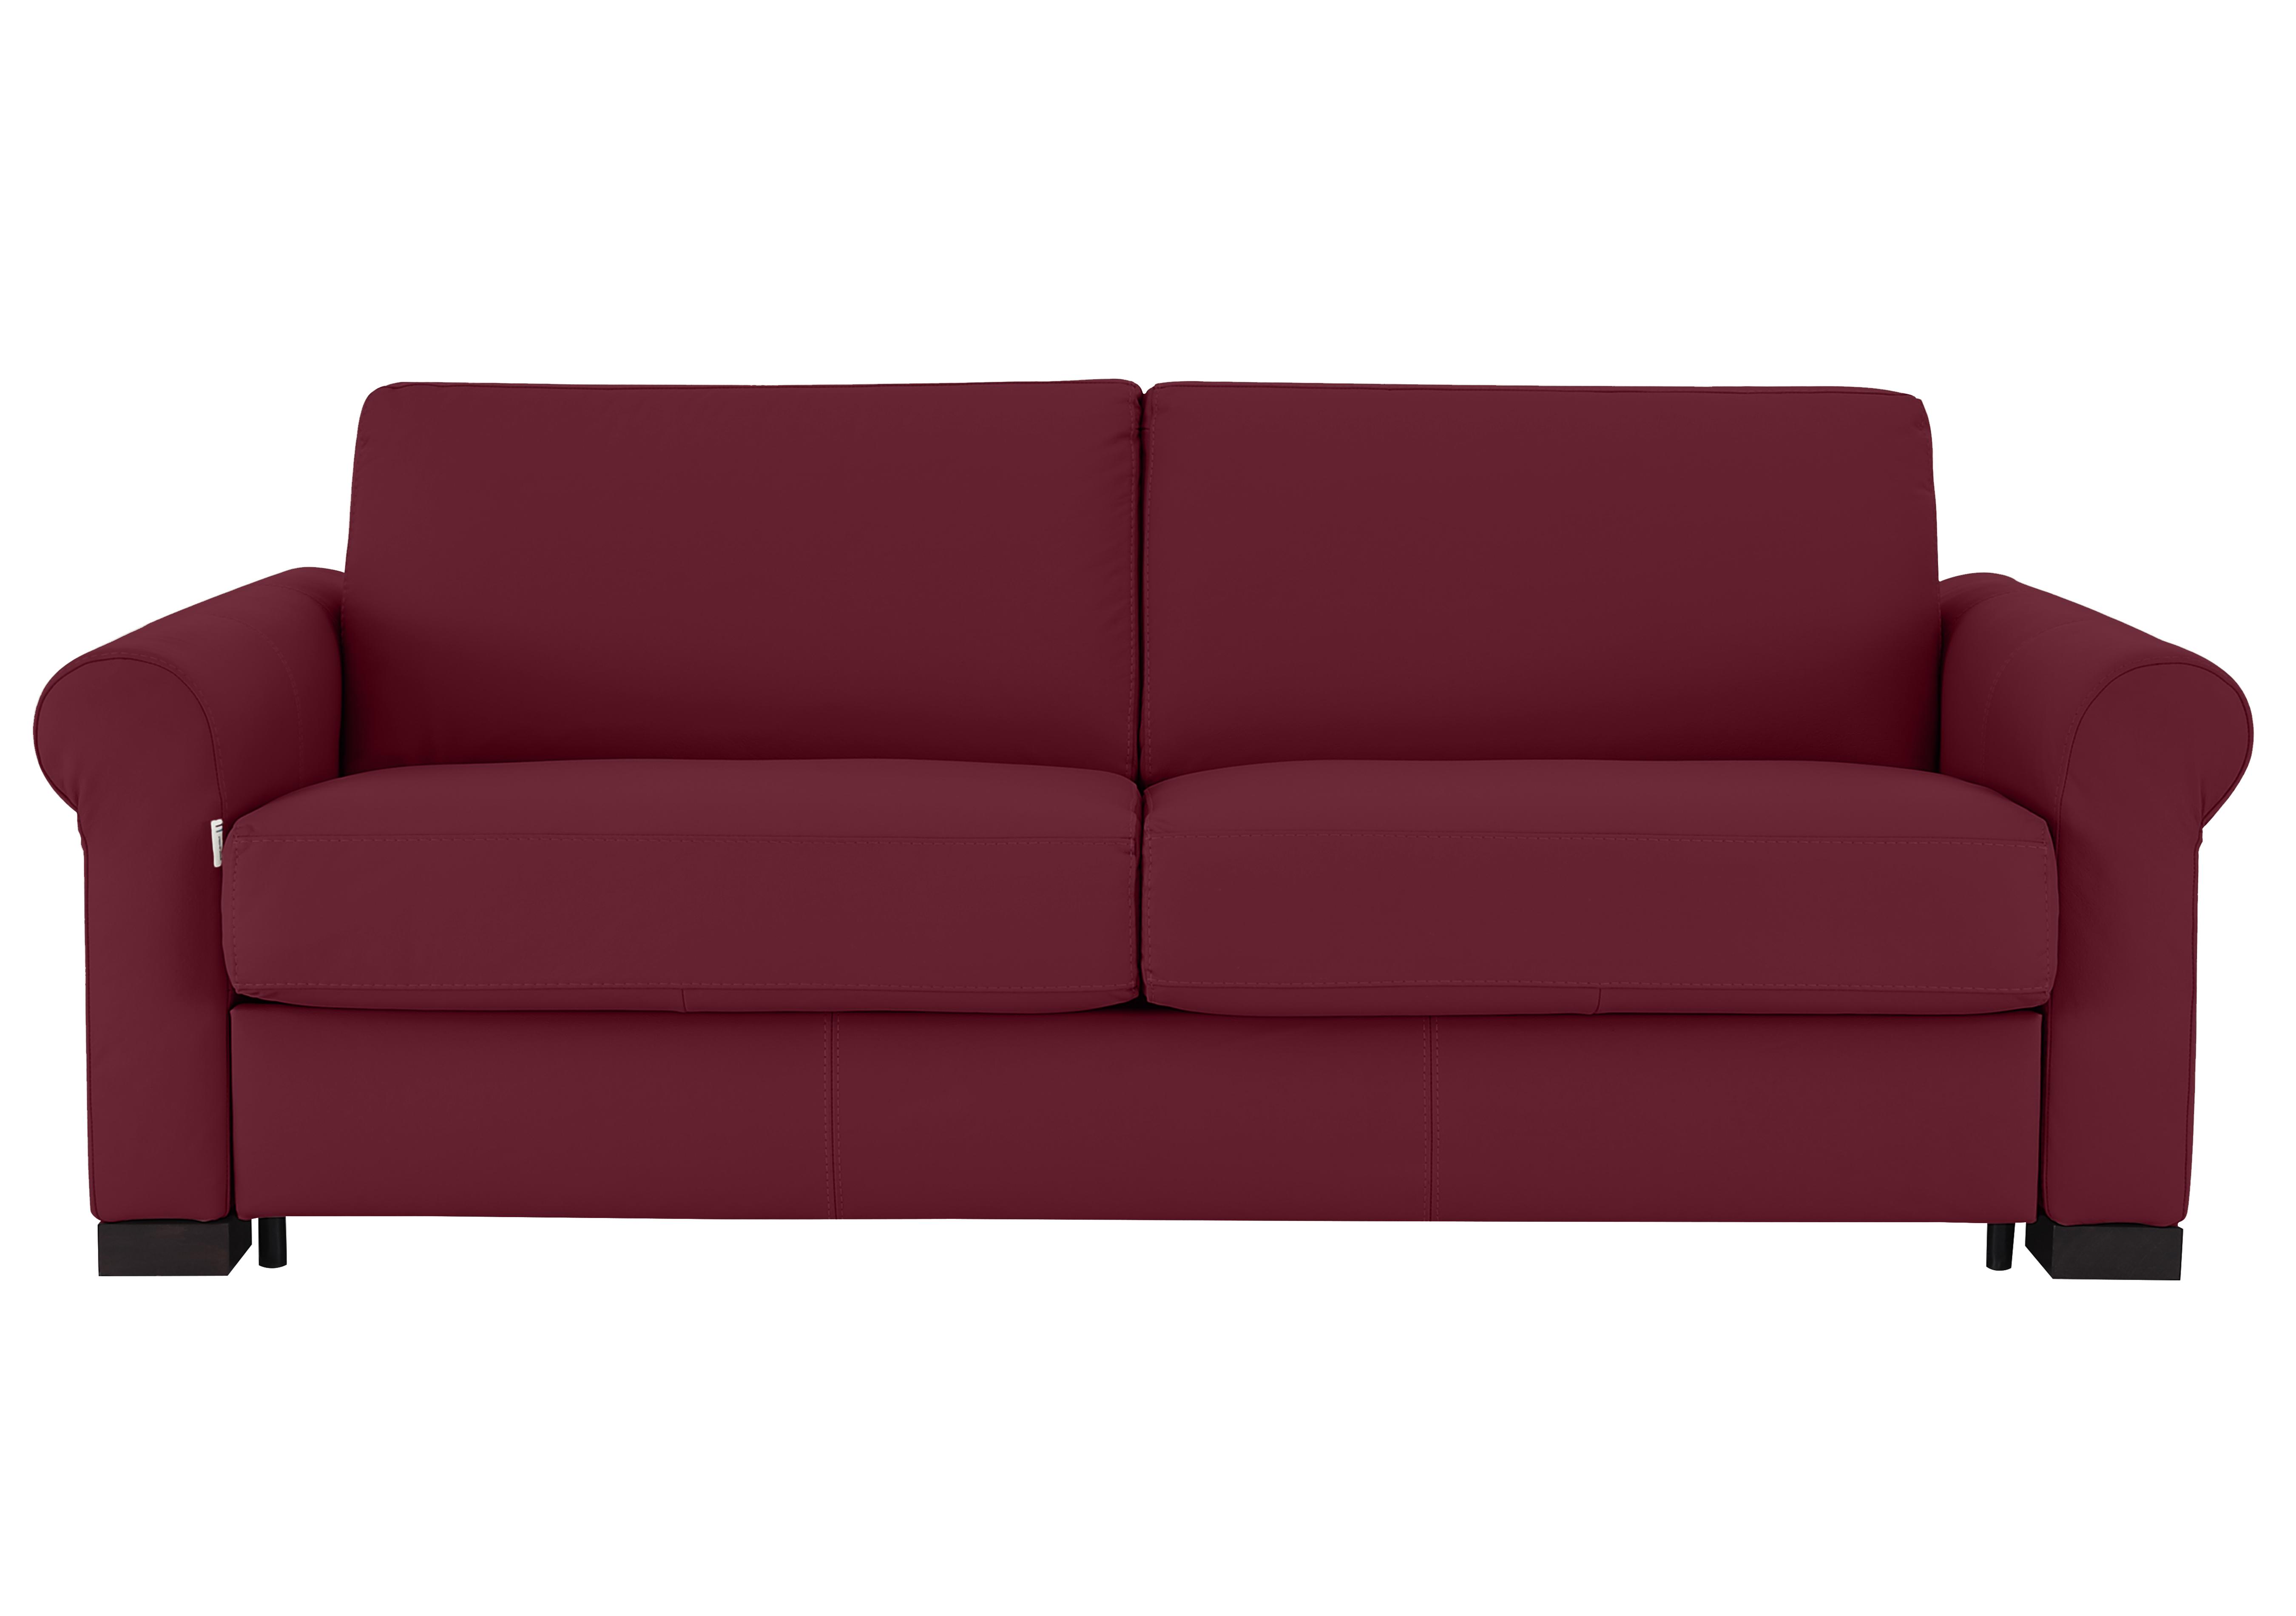 Alcova 3 Seater Leather Sofa Bed with Scroll Arms in Dali Bordeaux 1521 on Furniture Village